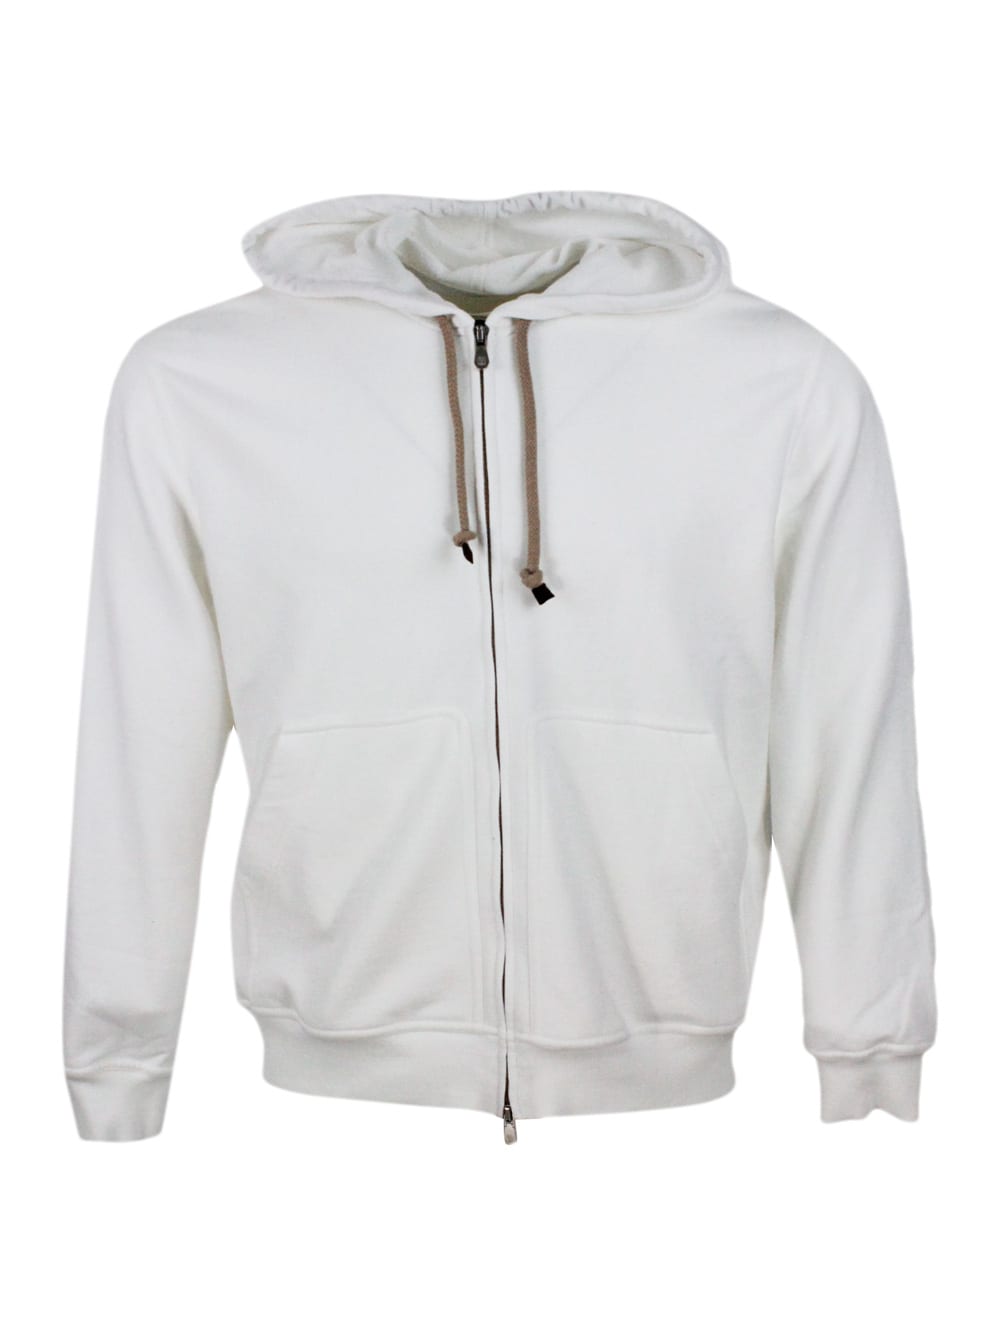 BRUNELLO CUCINELLI HOODED SWEATSHIRT WITH DRAWSTRING IN SOFT AND PRECIOUS COTTON WITH ZIP CLOSURE